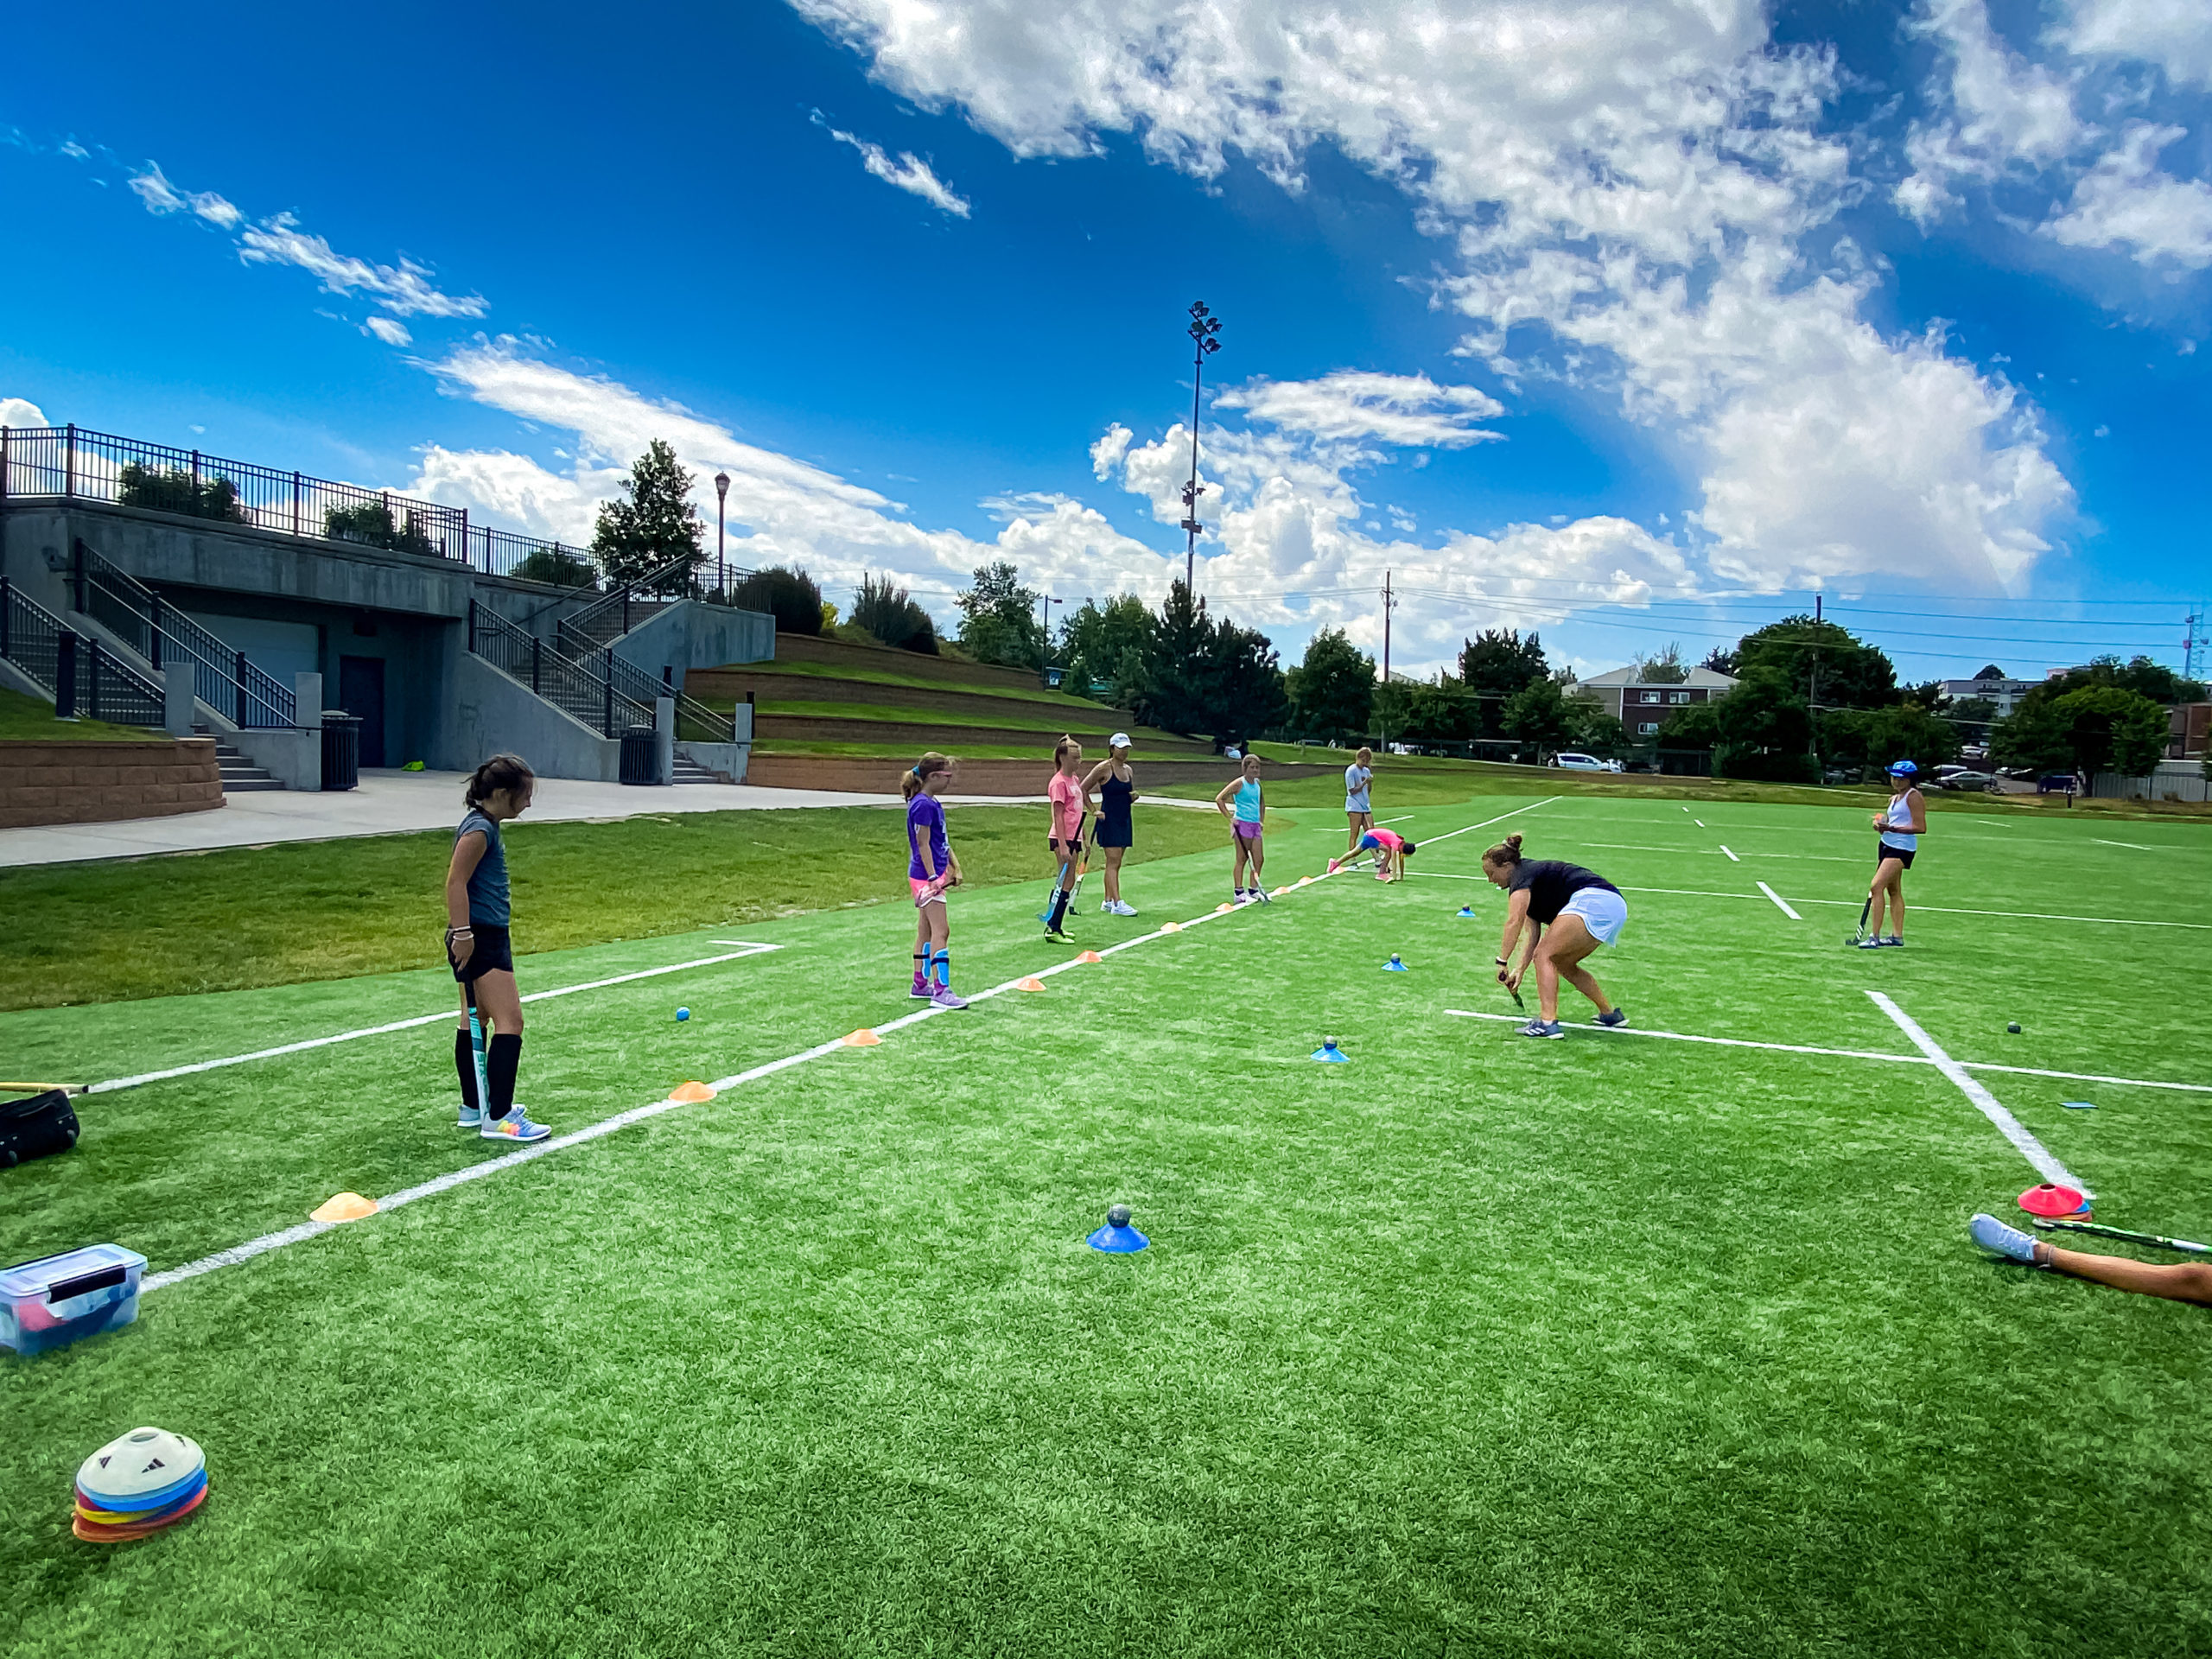 Sydney Supica demonstrates a skill to a group of young field hockey players on a green turf under blue sky and dramatic cumulous clouds.